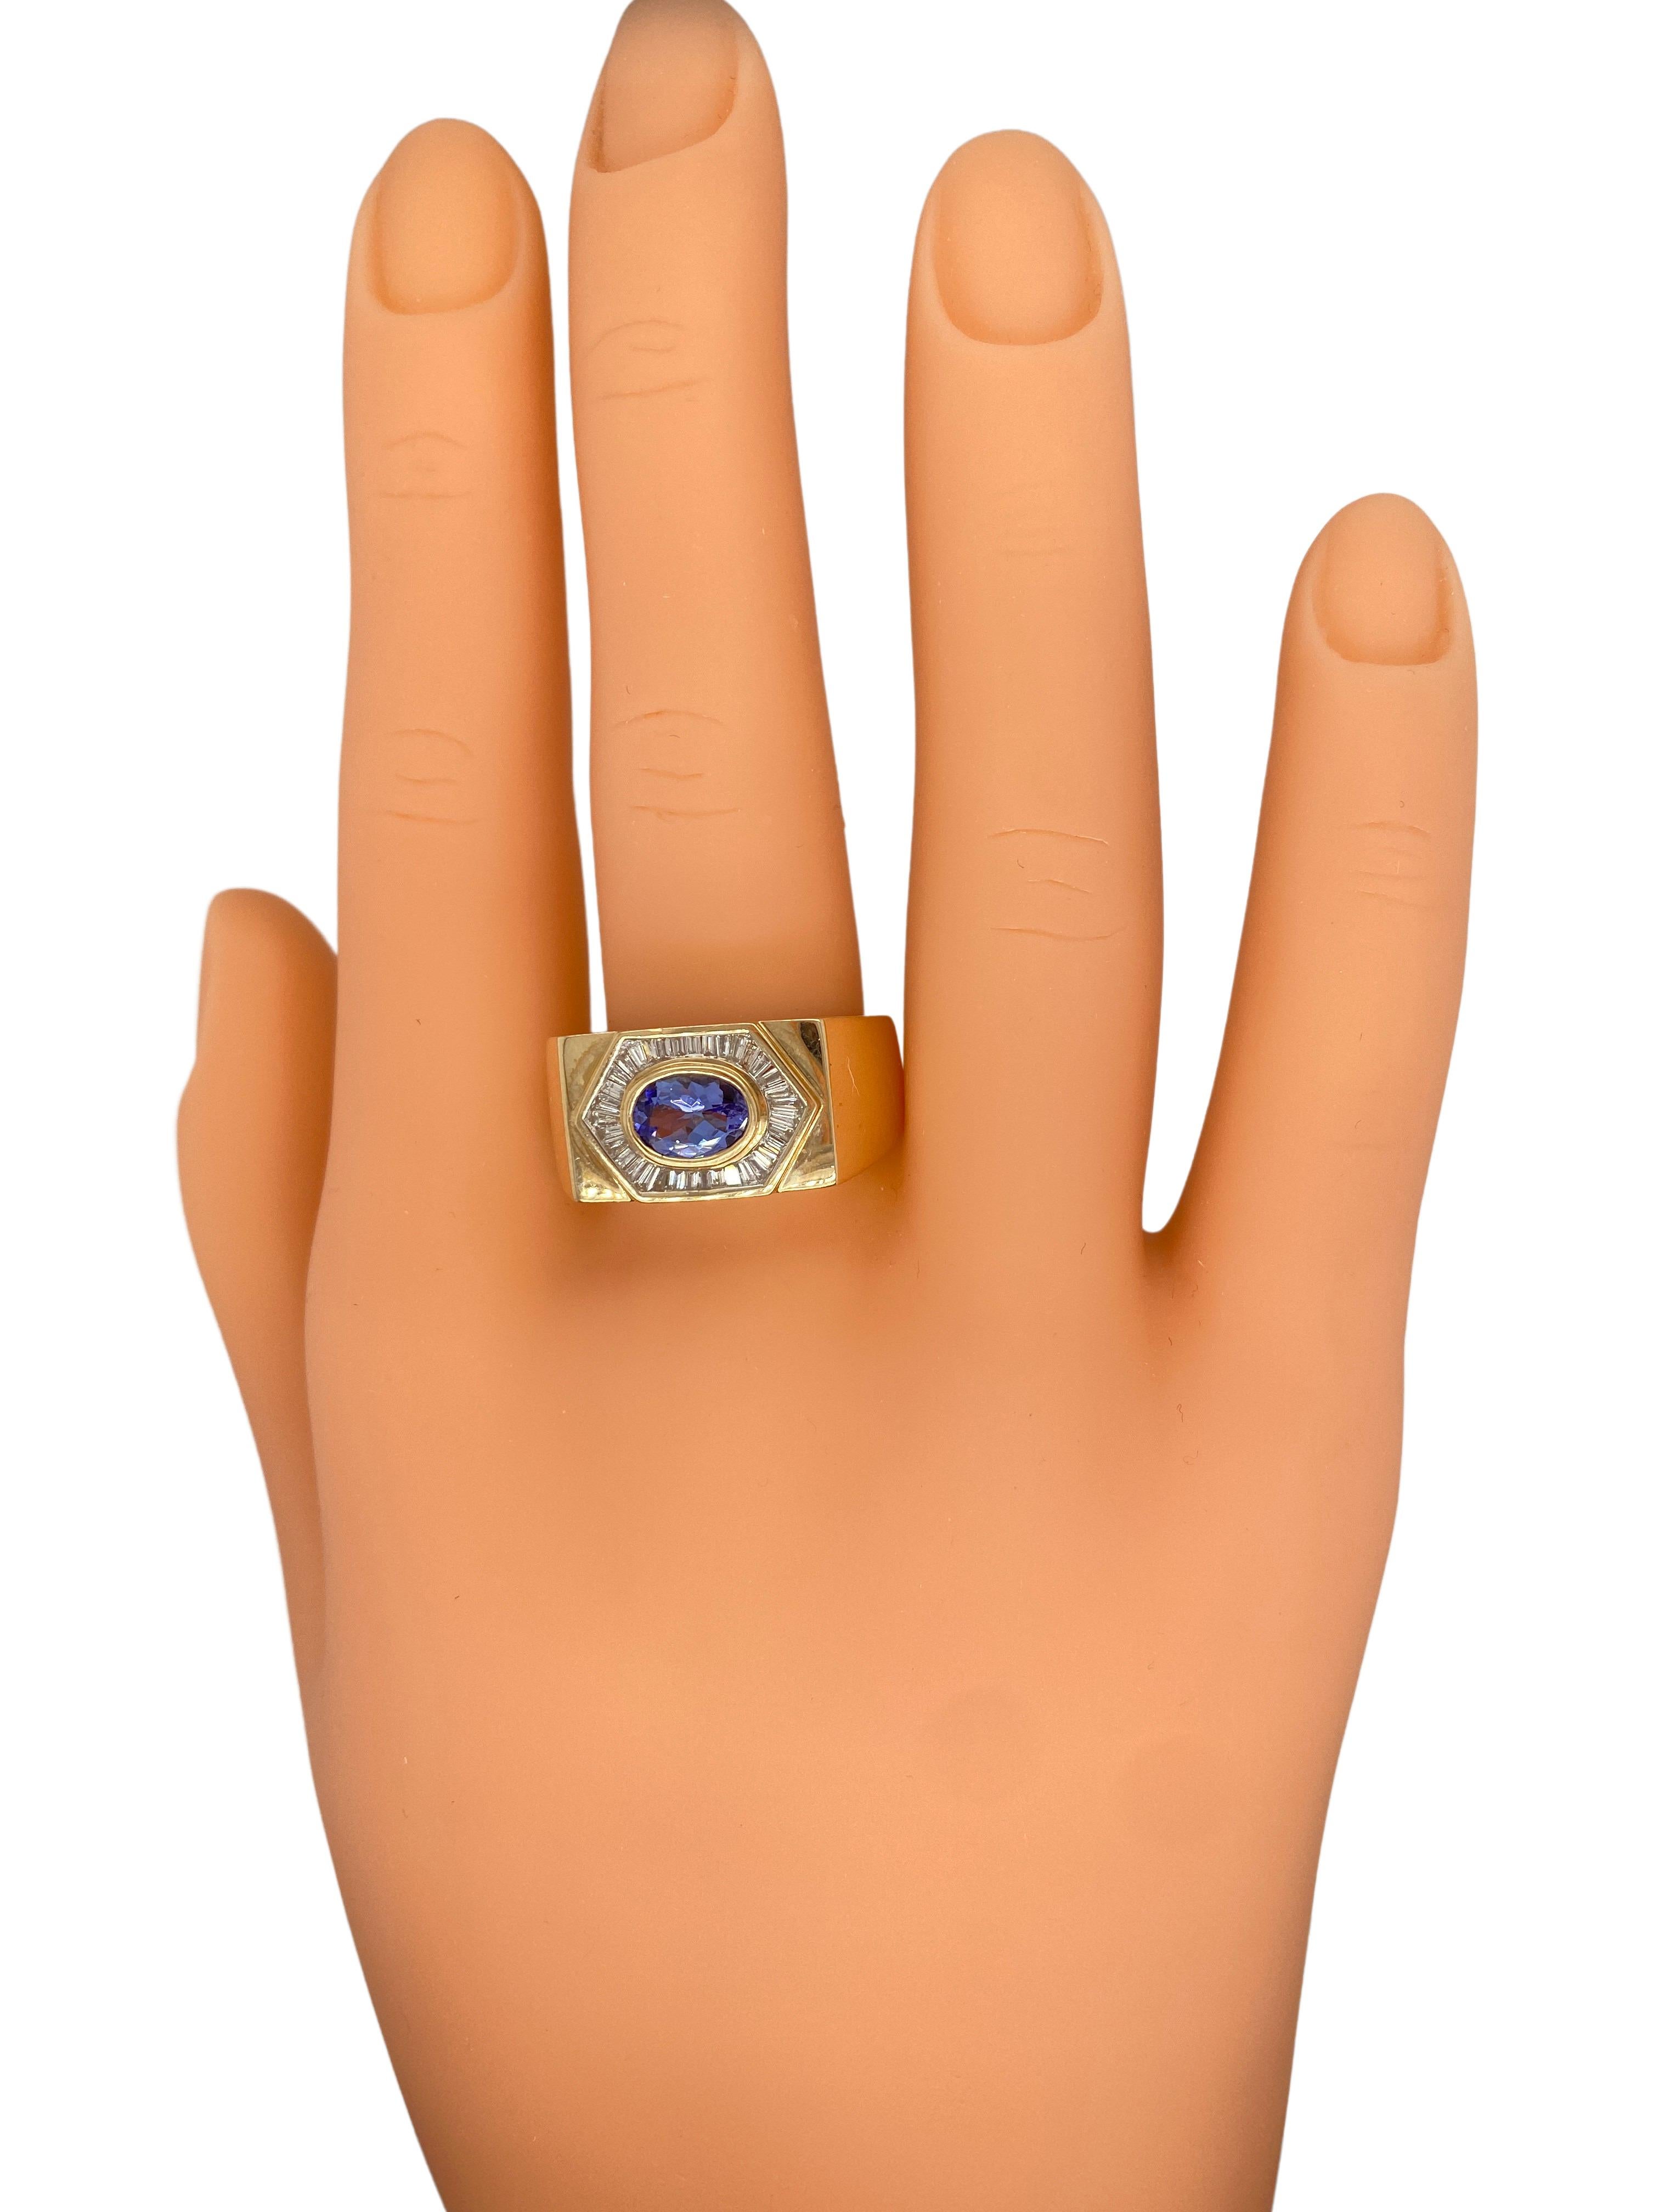 Circa 1980s 1.12 Carat Oval Sapphire and Diamond Ring in 14K Gold In Good Condition For Sale In Addison, TX